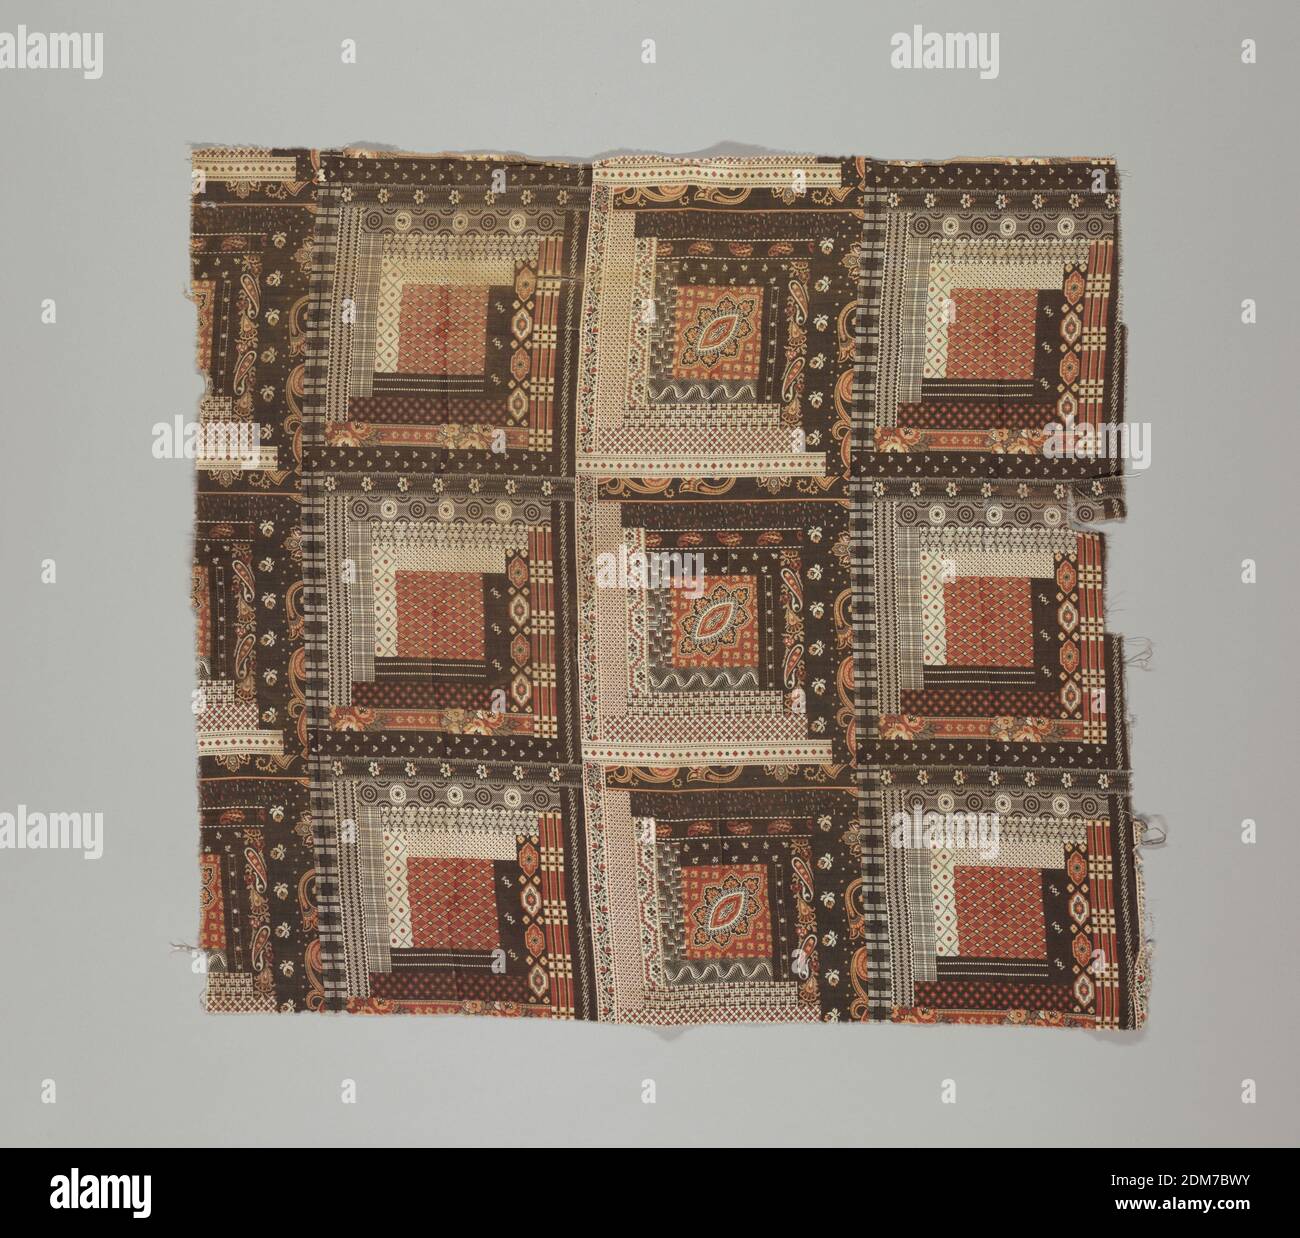 Textile, Medium: cotton Technique: printed by engraved roller on plain weave, Two fragments of printed cotton imitating patchwork: rows of squares of two types each traditionally called 'log cabin' in a stepped arrangement of bars enclosing a central square. Each shape has a small scale dotted or floral pattern (several Indian Paisley type) in dark browns and rust-reds., USA, 1880s, printed, dyed & painted textiles, Textile Stock Photo